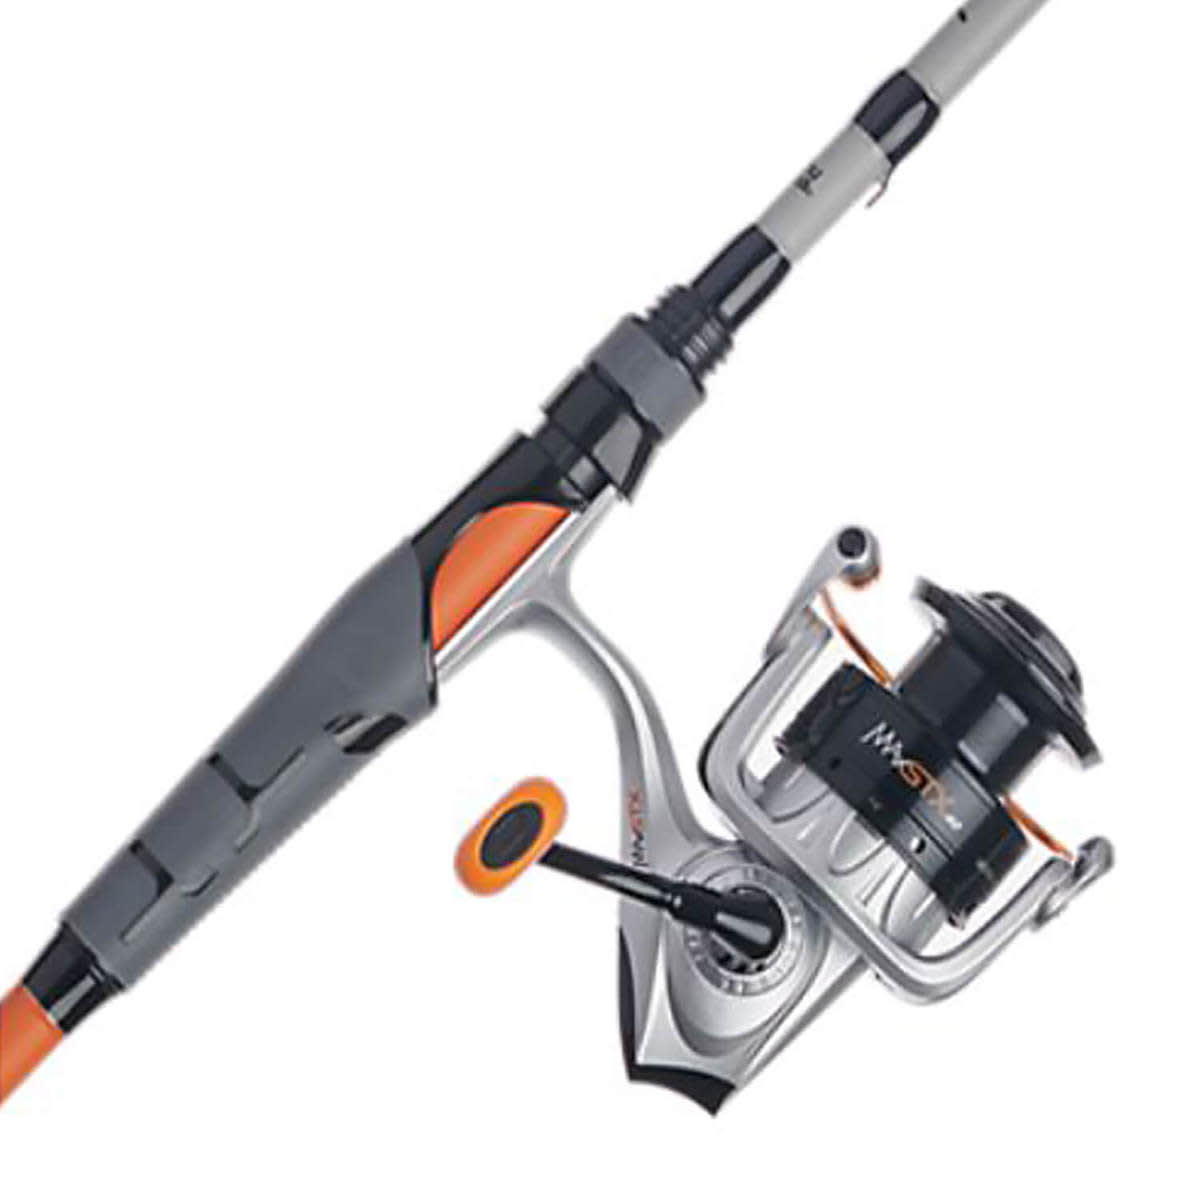 Abu Garcia Max STX Spinning Rod and Reel Combo - ON SALE NOW!